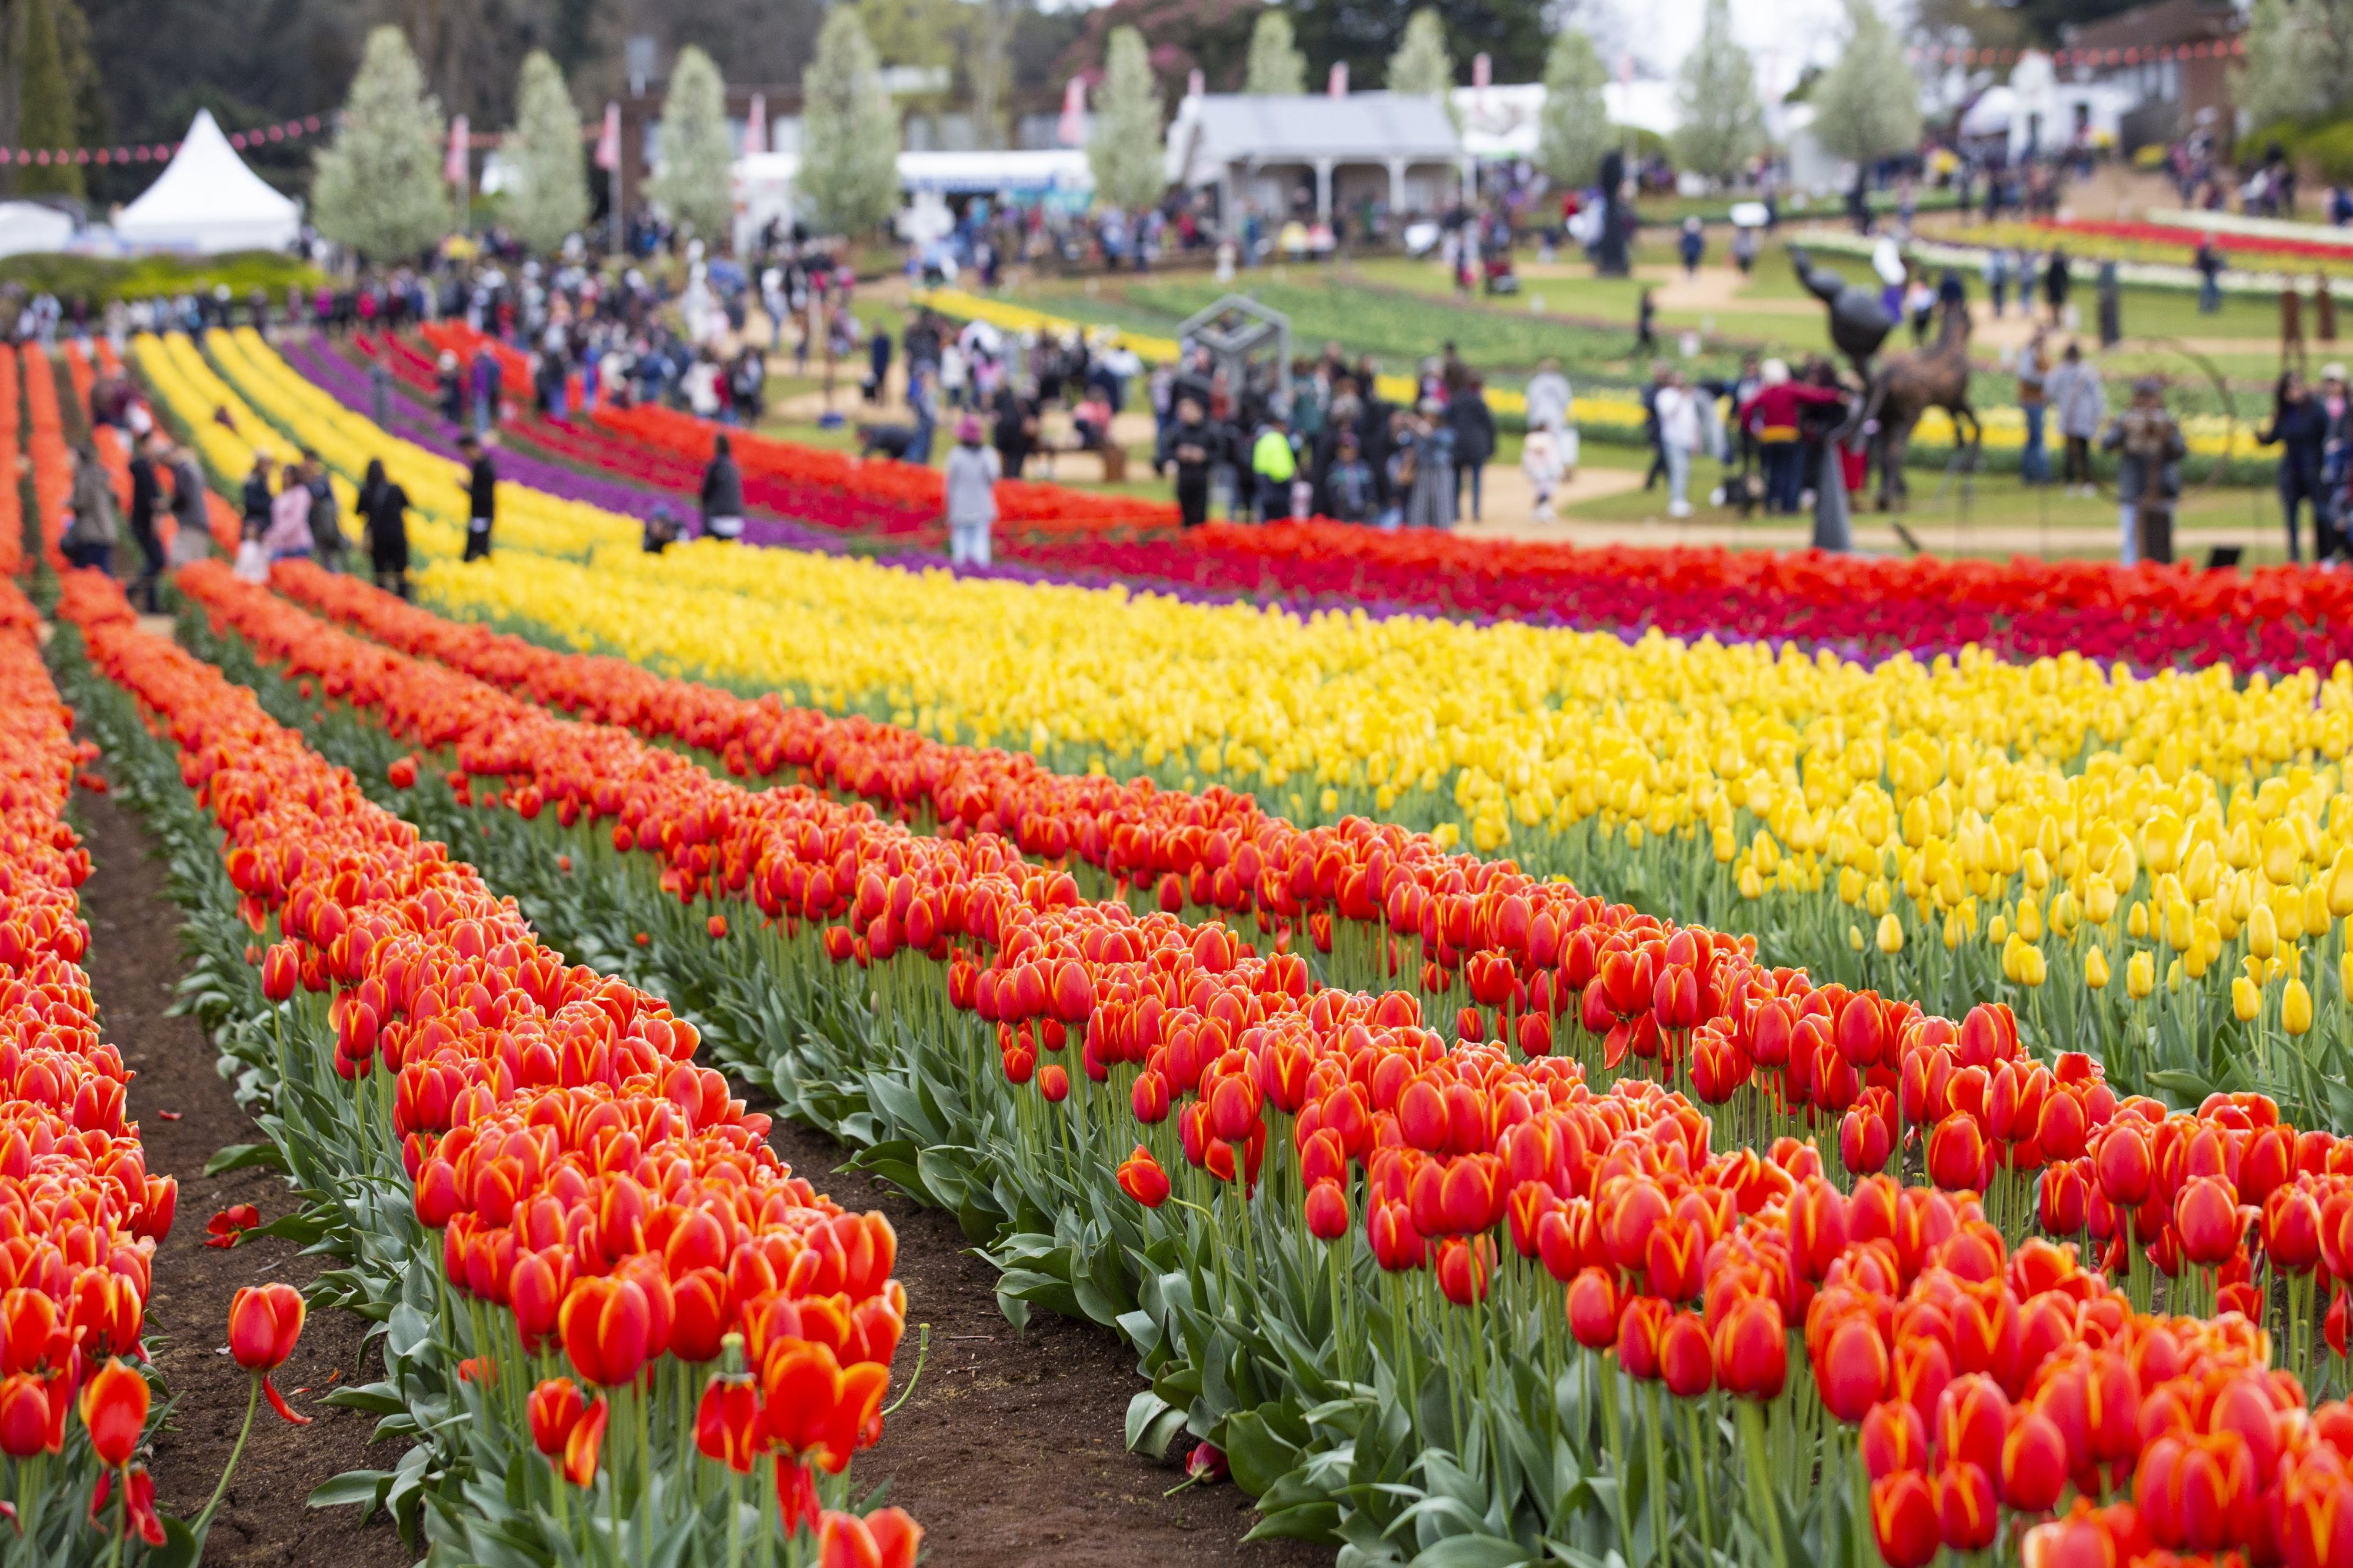 Surround yourself with 900,000 flowers at this huge tulip festival